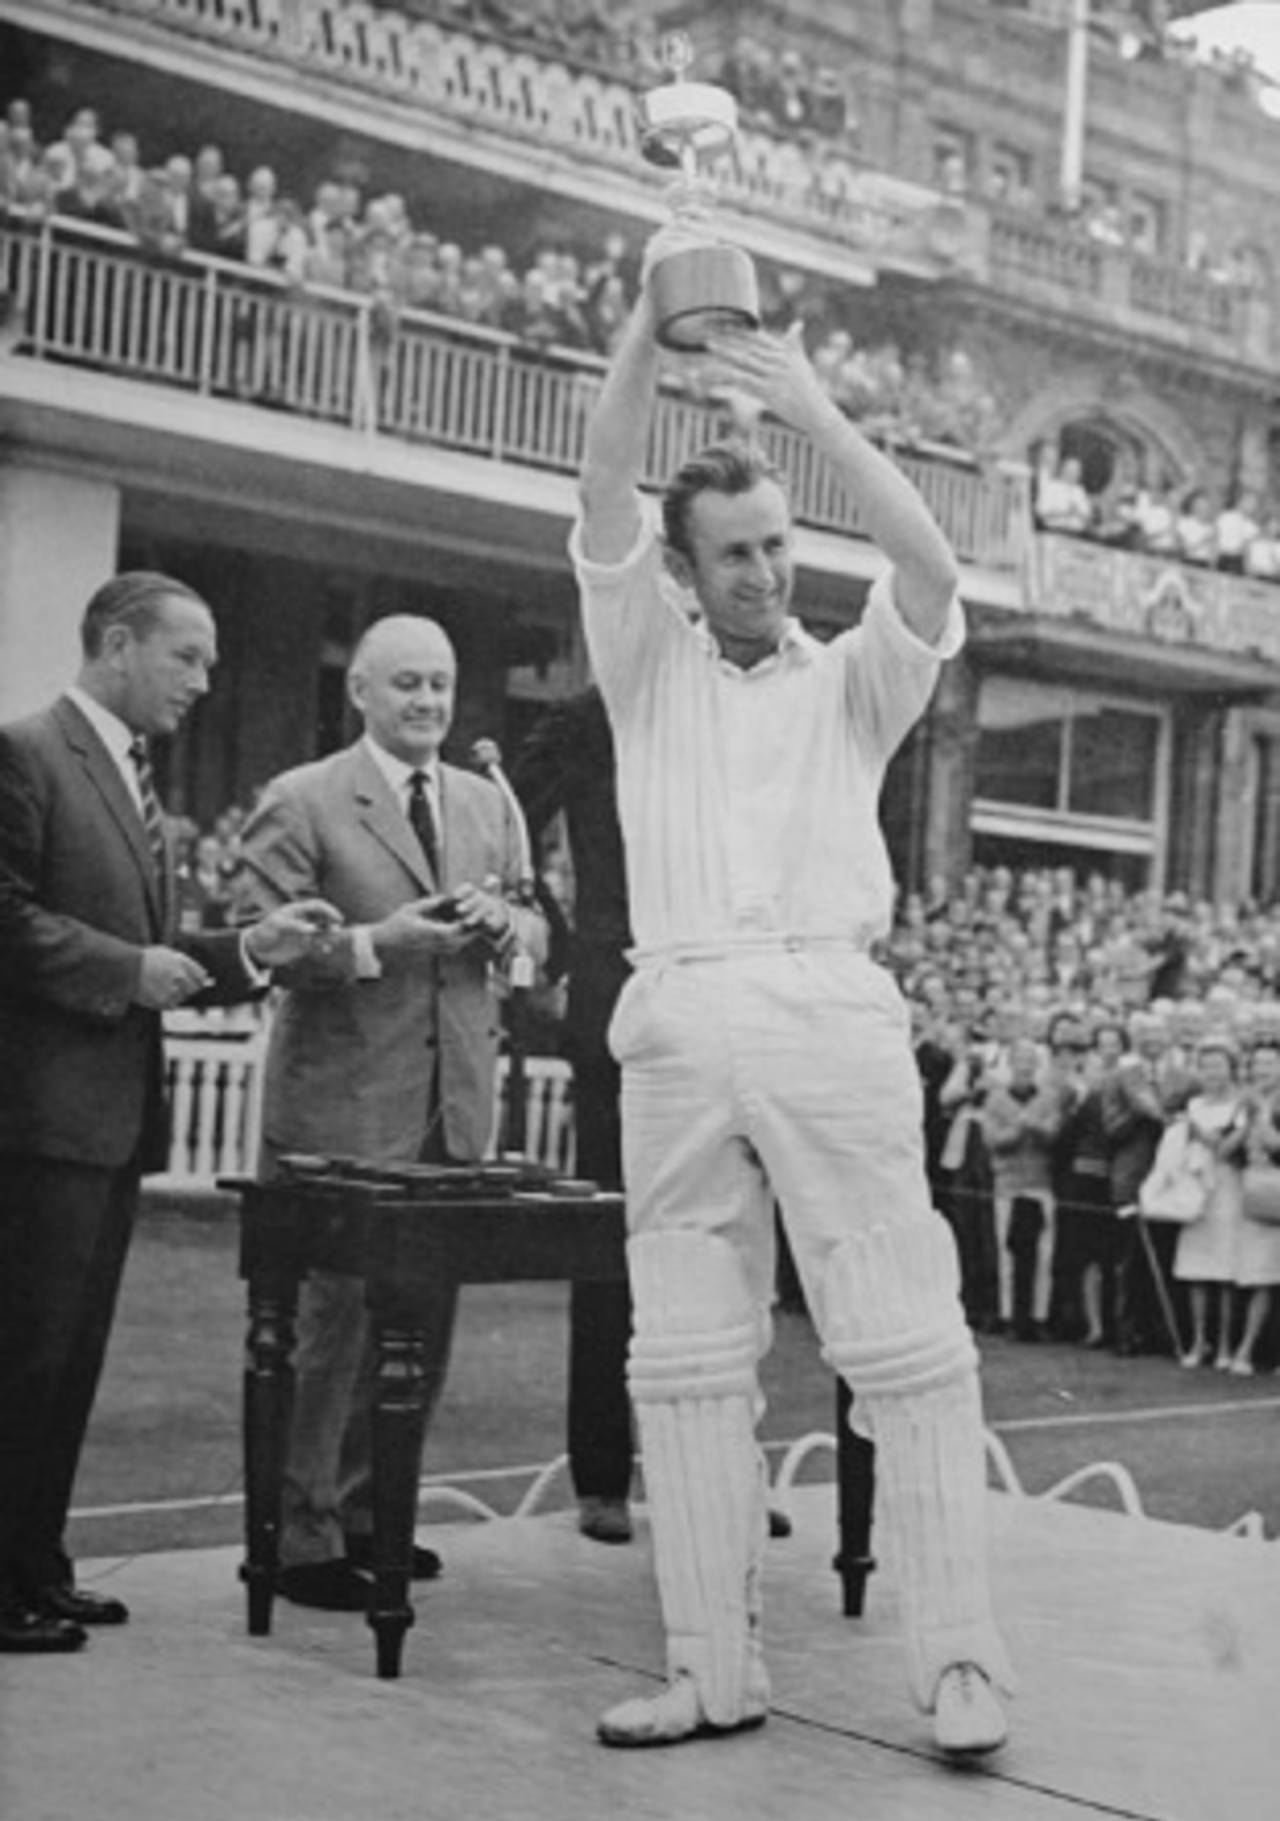 Ted Dexter lifts the Gillette Cup after Sussex's victory in 1964